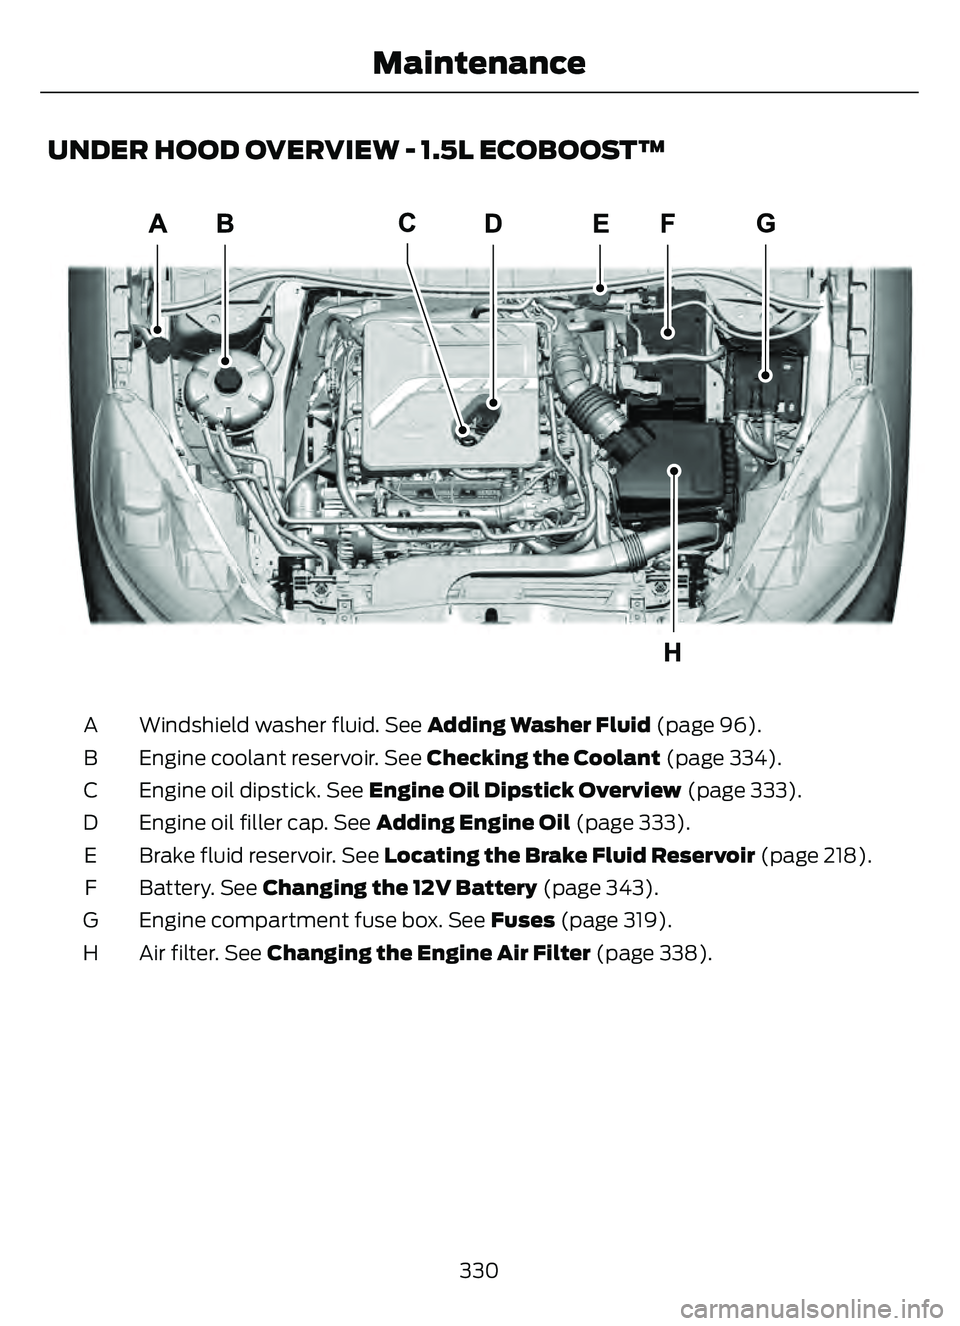 FORD ESCAPE 2022 User Guide UNDER HOOD OVERVIEW - 1.5L ECOBOOST™
308 93E308193
Windshield washer fluid. See Adding Washer Fluid (page 96).
A
Engine coolant reservoir. See  Checking the Coolant (page 334).
B
Engine oil dipstick